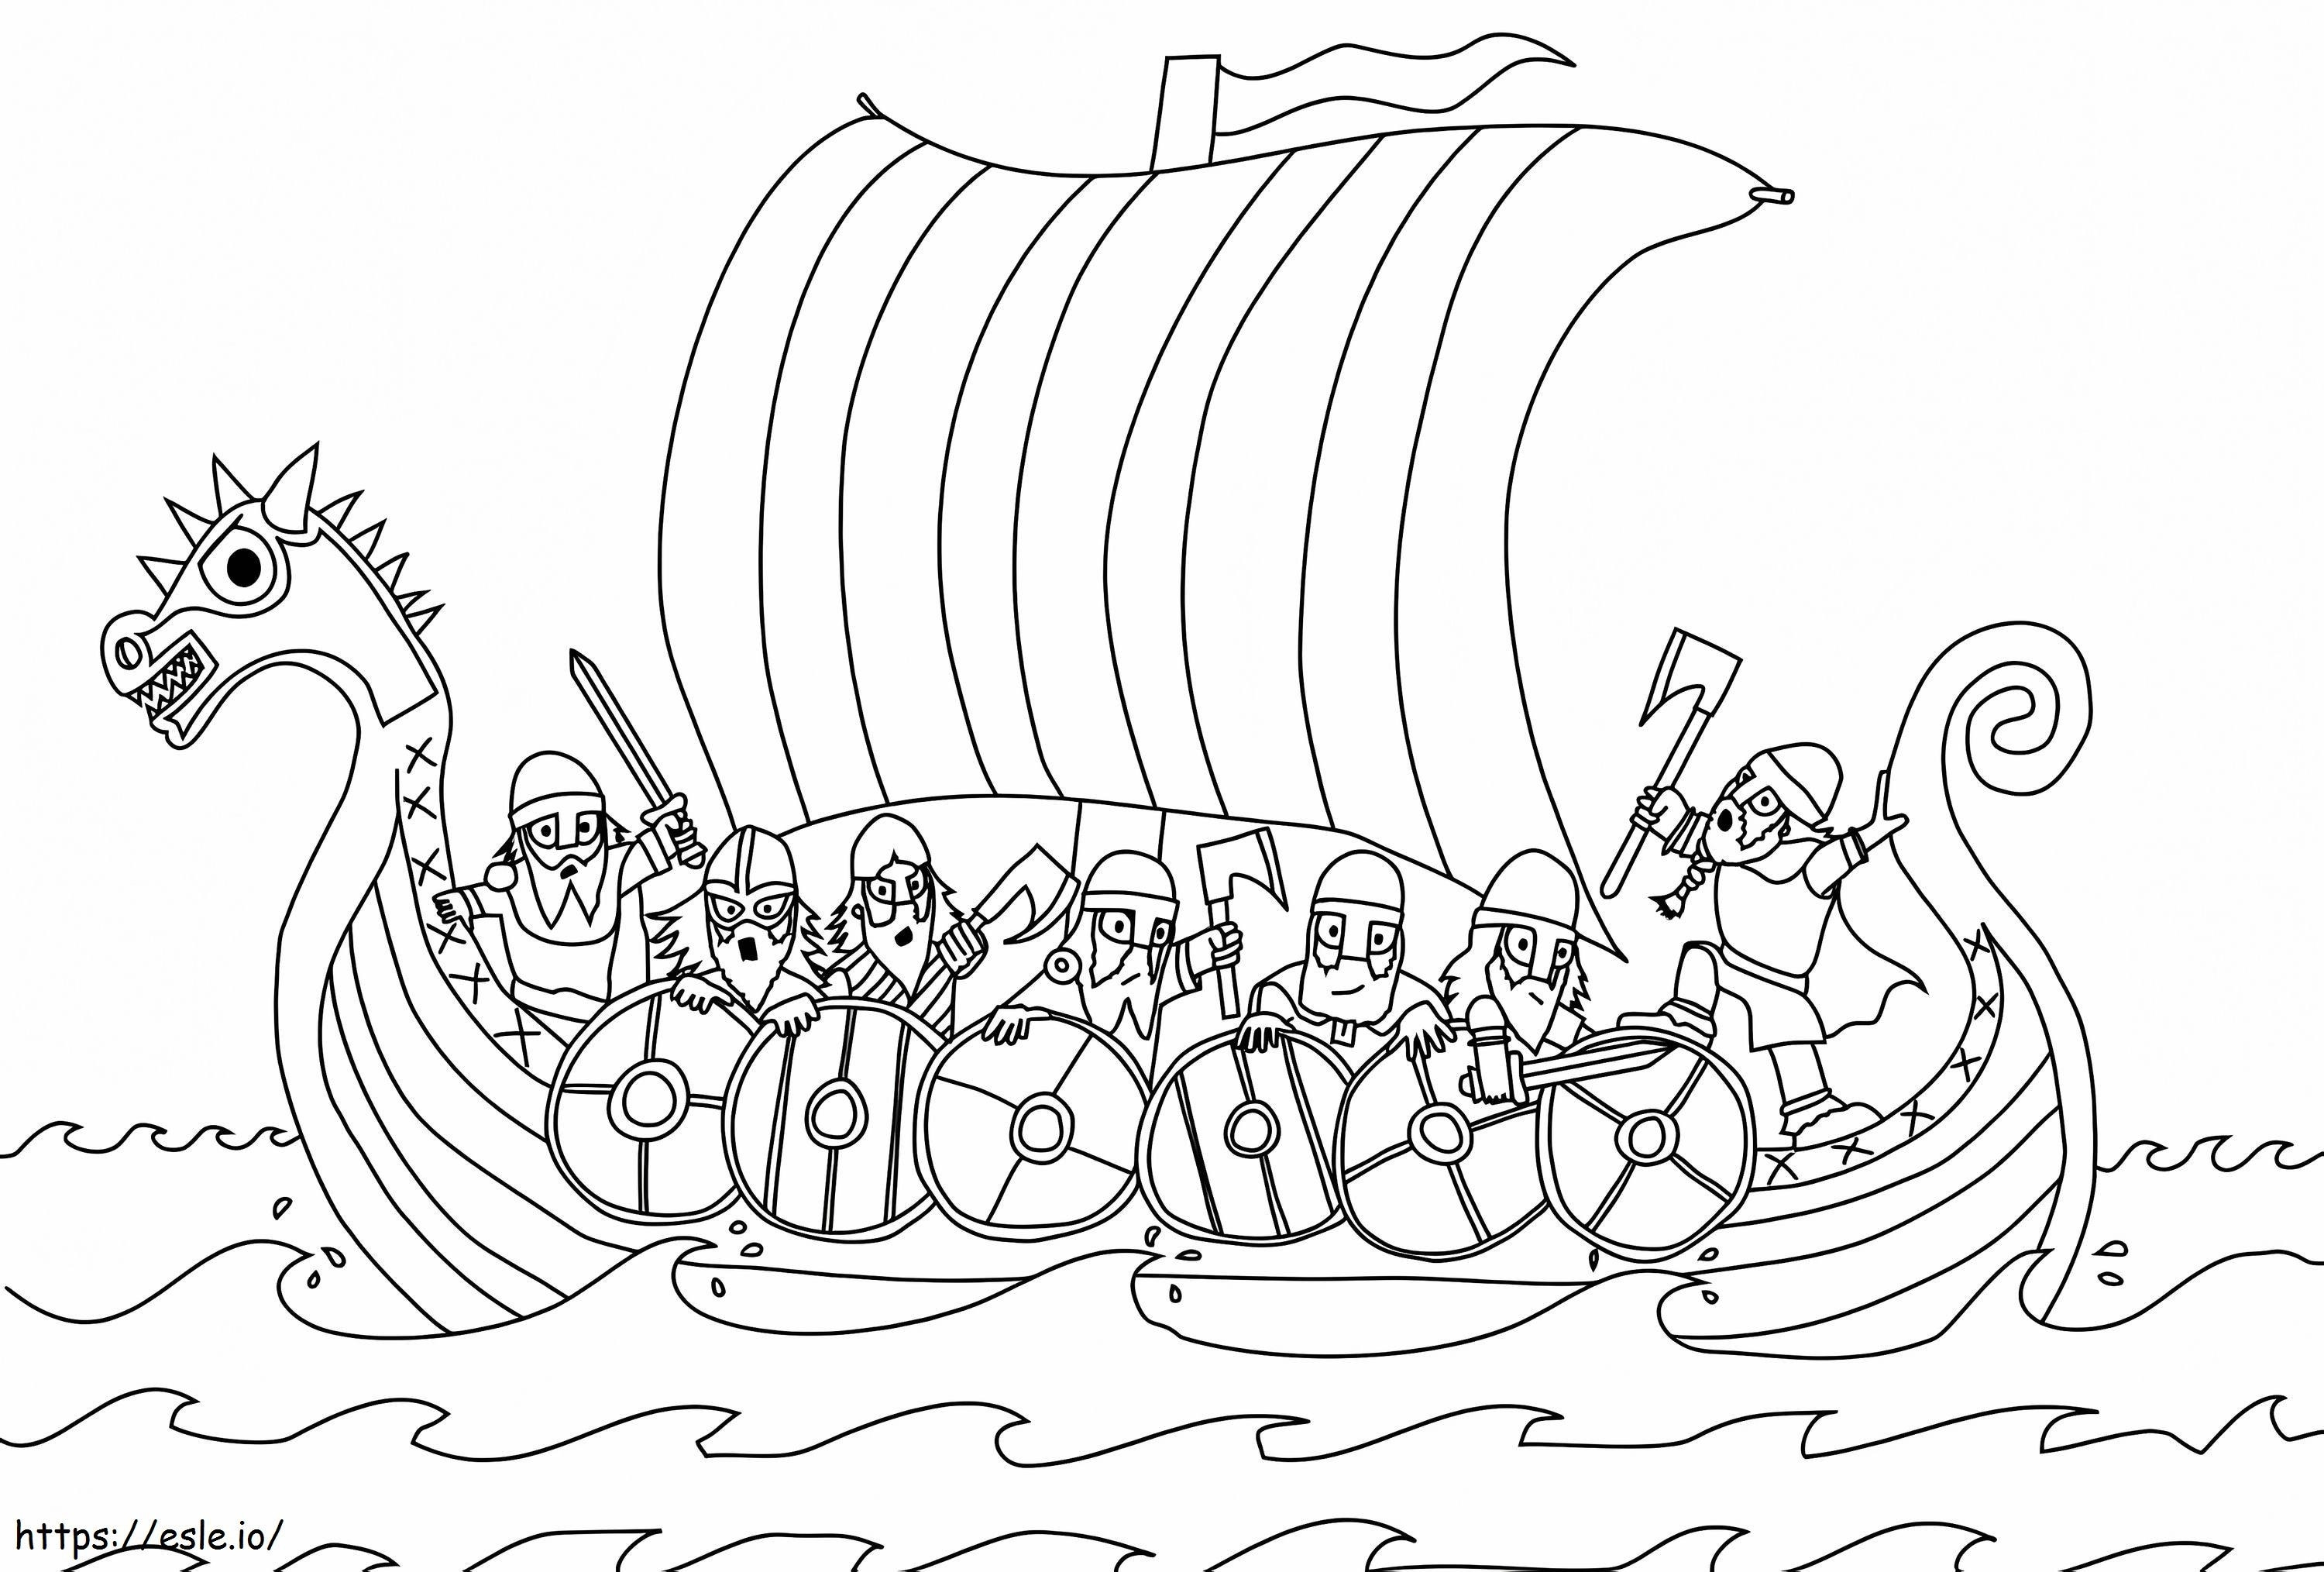 Vikings On Boat coloring page